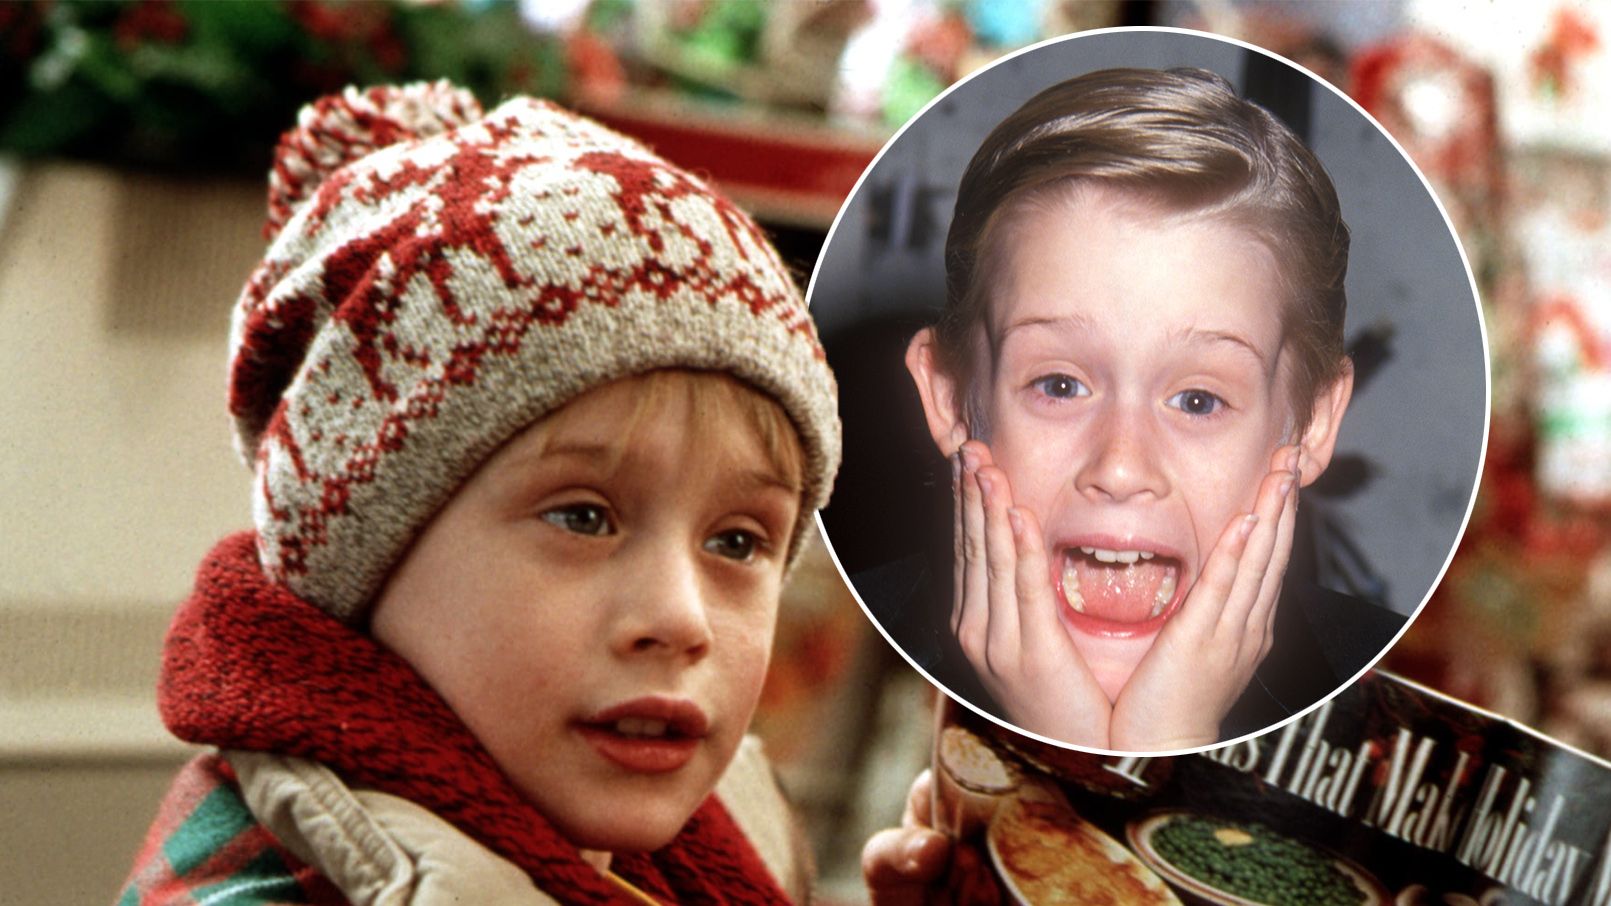 Home Alone reboot: Home Sweet Home Alone is out now